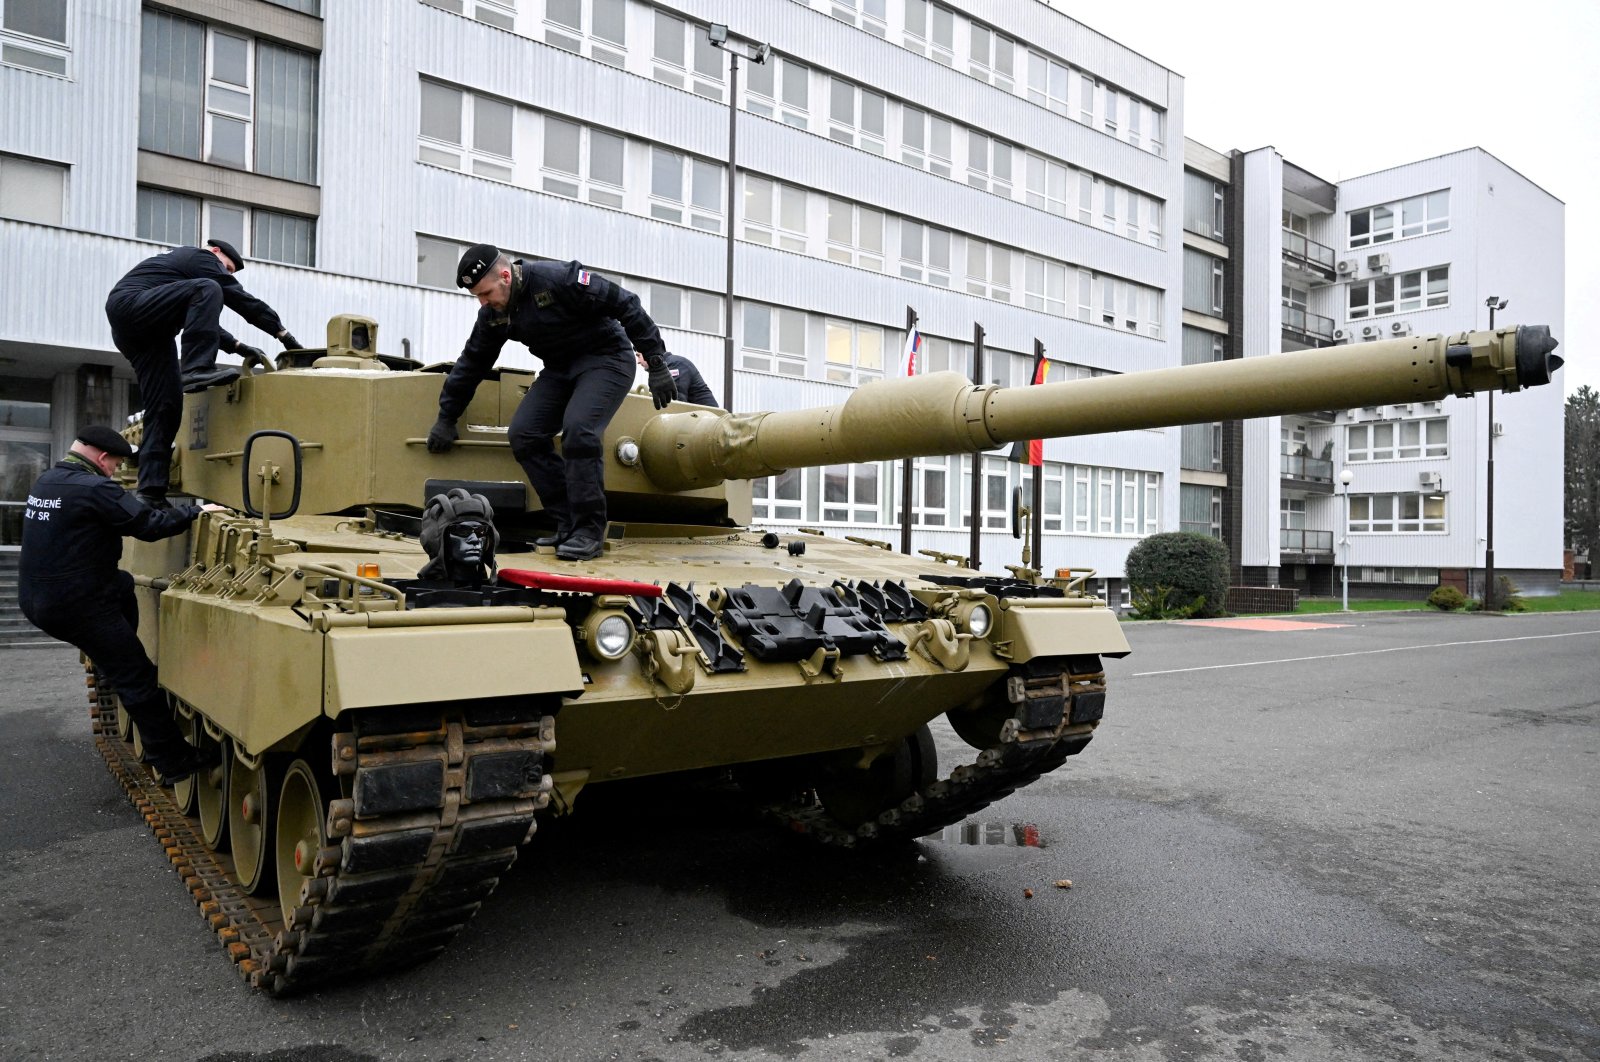 Members of the military walk on a tank, as Germany delivers its first Leopard tanks to Slovakia as part of a deal after Slovakia donated fighting vehicles to Ukraine, in Bratislava, Slovakia, Dec. 19, 2022. (Reuters Photo)